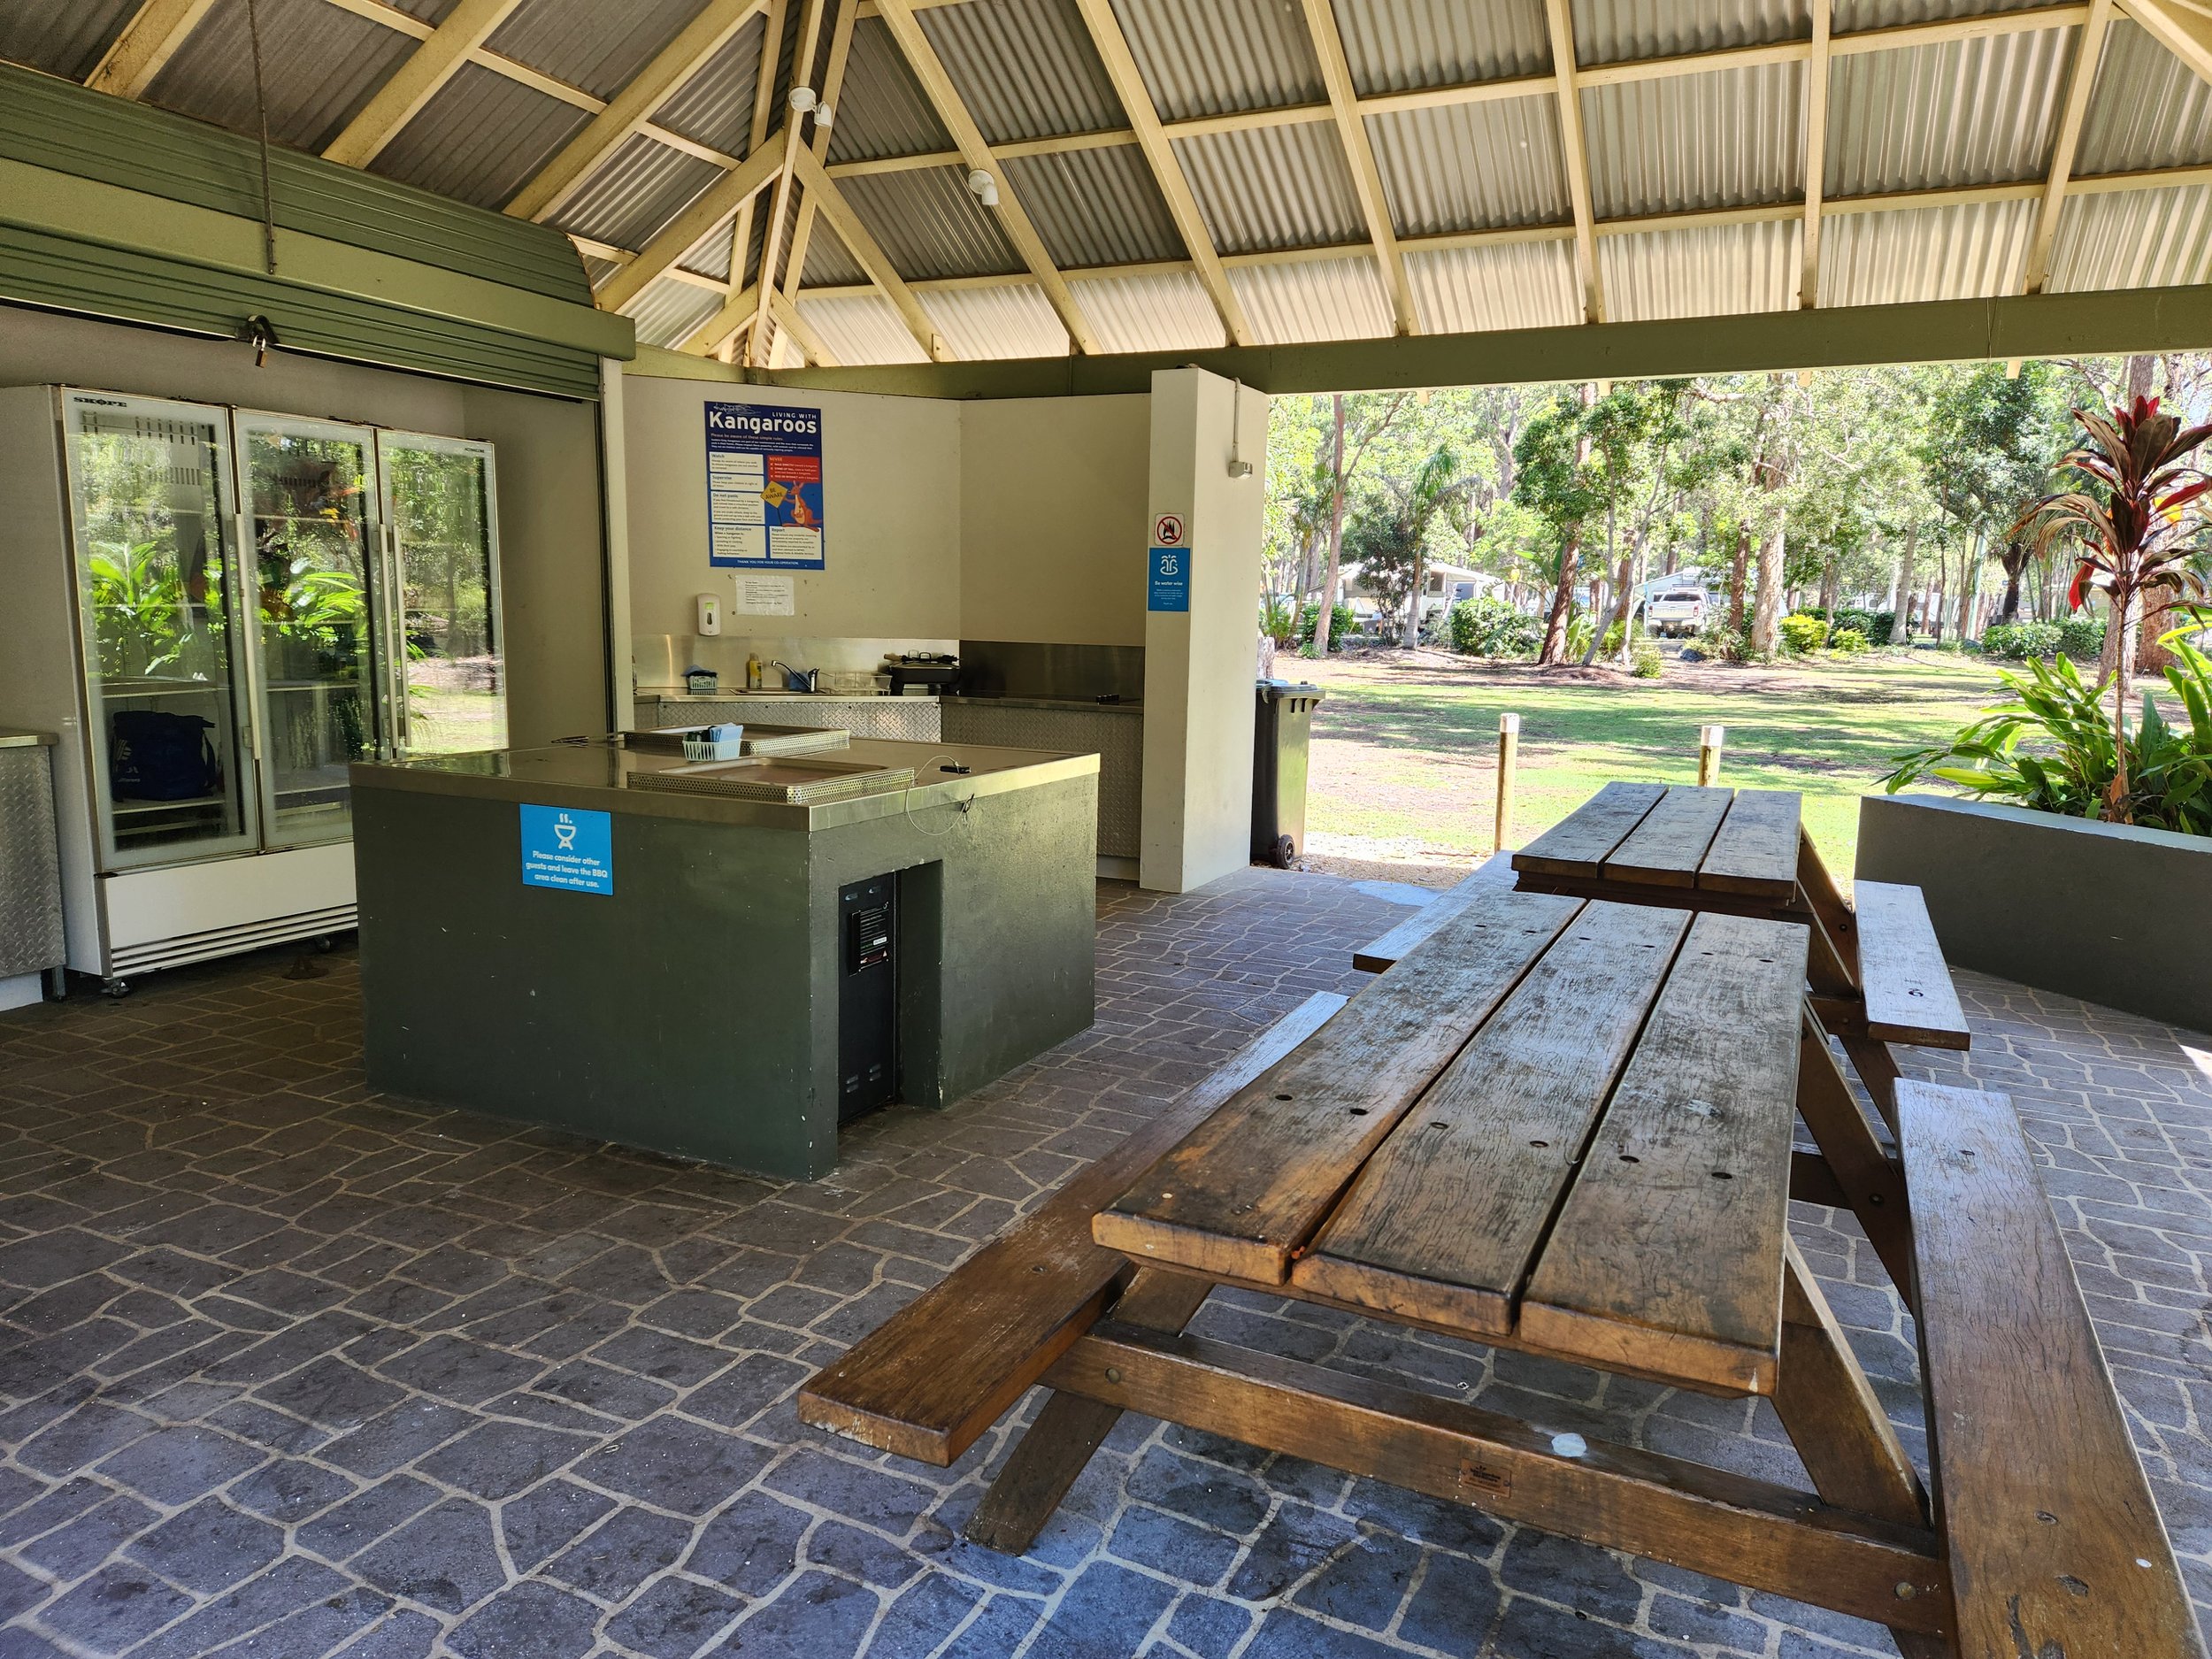 Many campsites have kitchen facilities, saving you heaps on cooking gear!